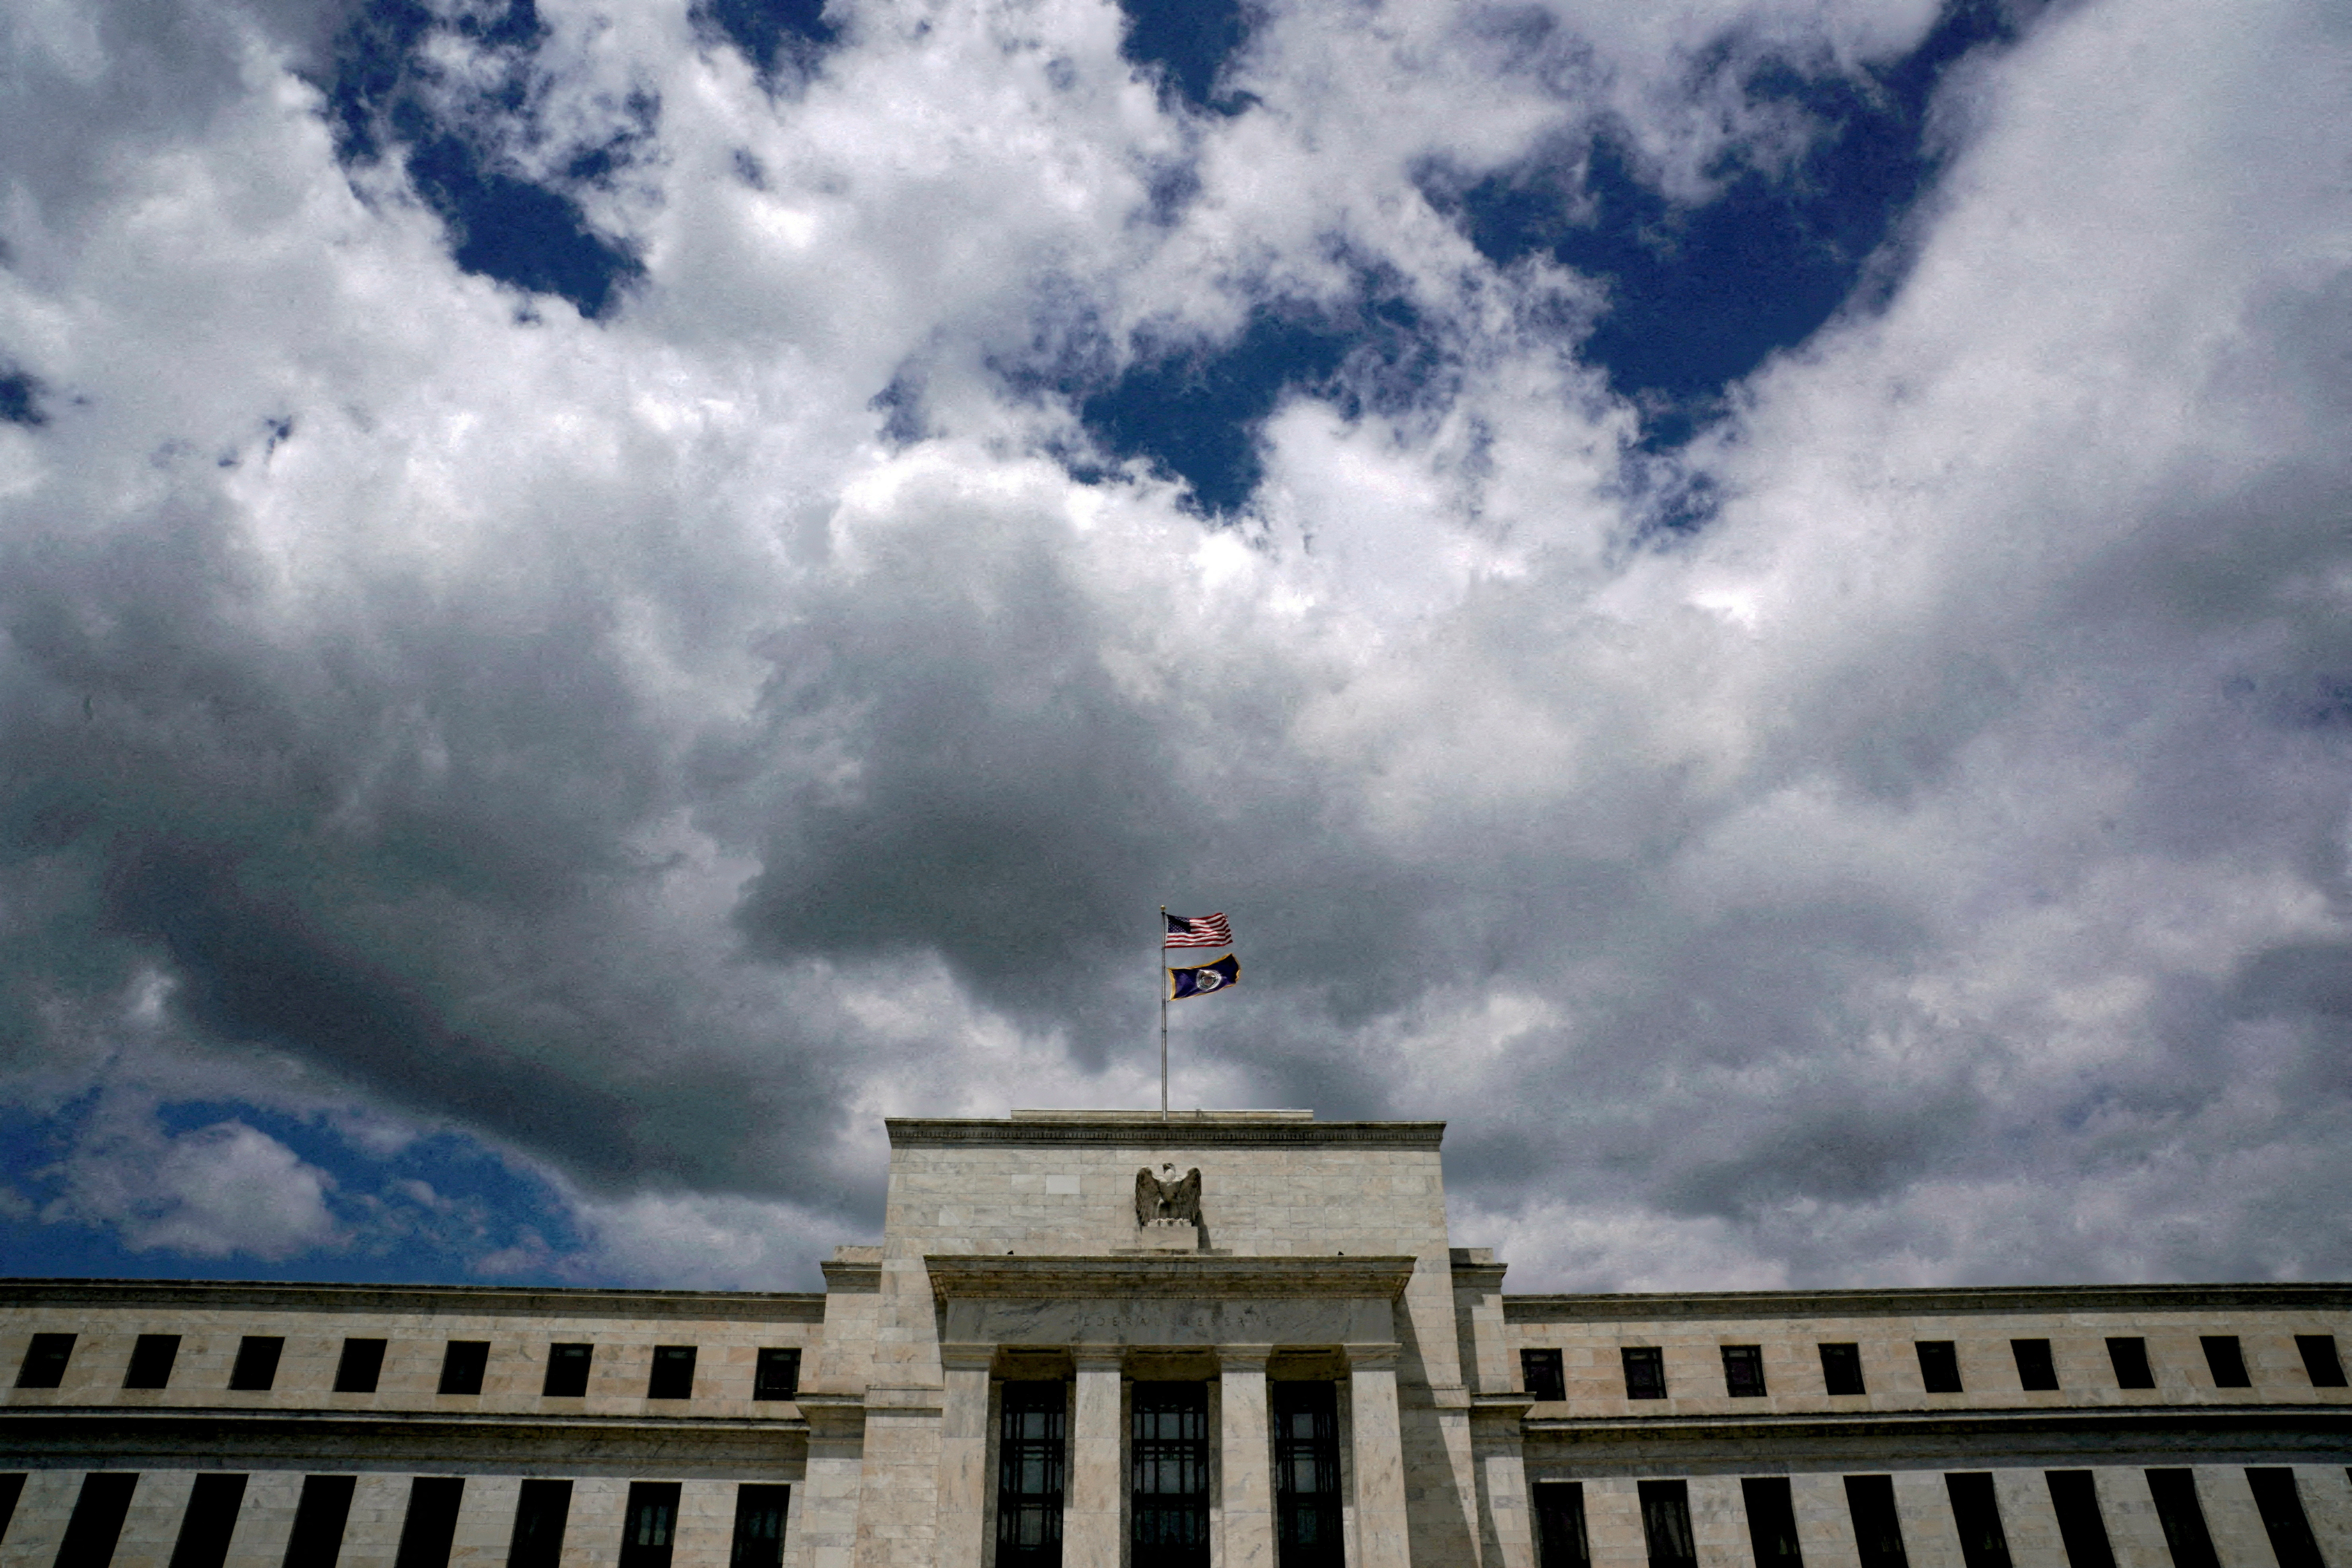 FIFILE PHOTO: Clouds over the Federal Reserve in Washington